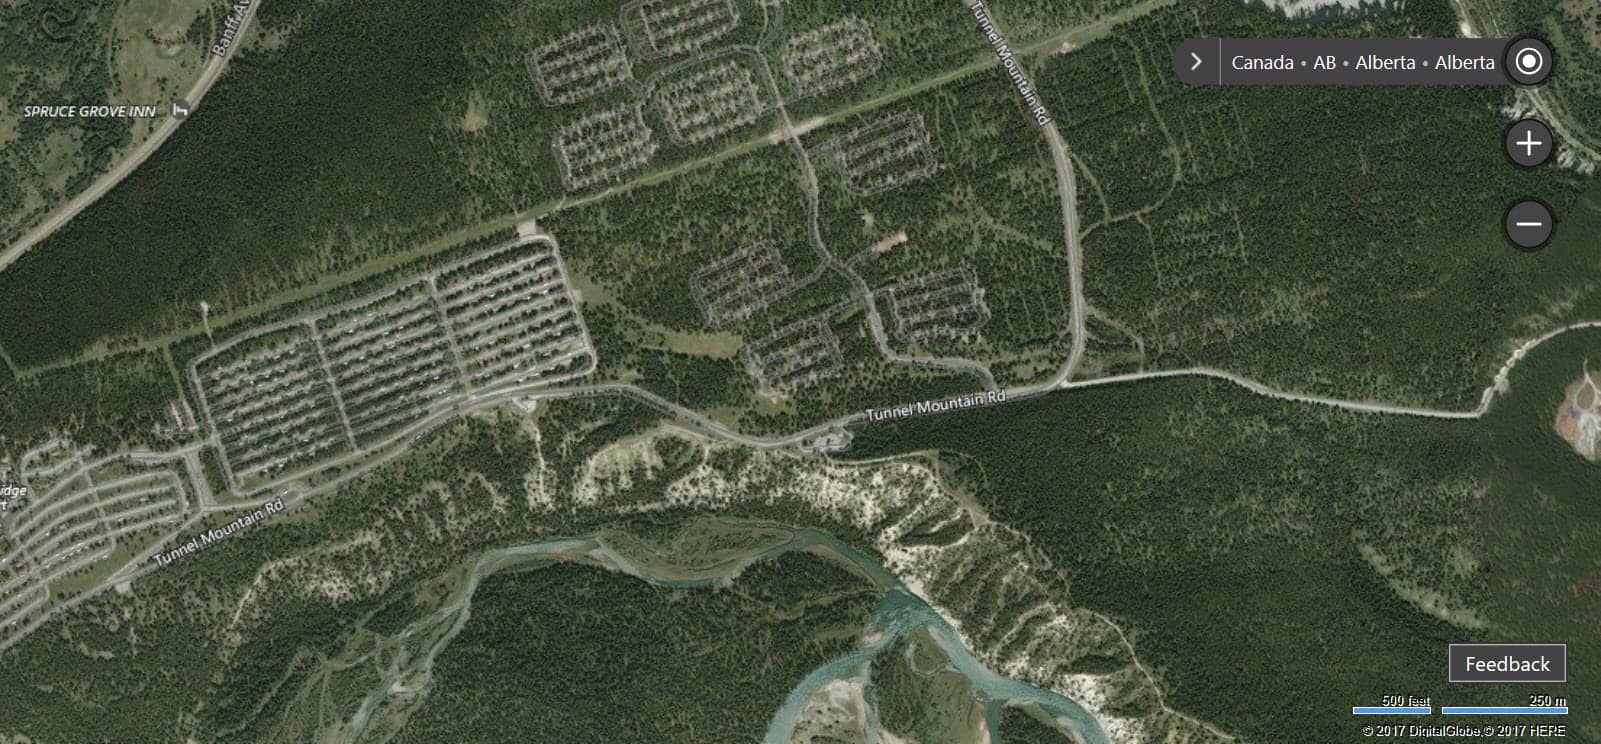 Bing maps publishes 2. 1 million square kilometers of new imagery for western canada - onmsft. Com - march 6, 2017